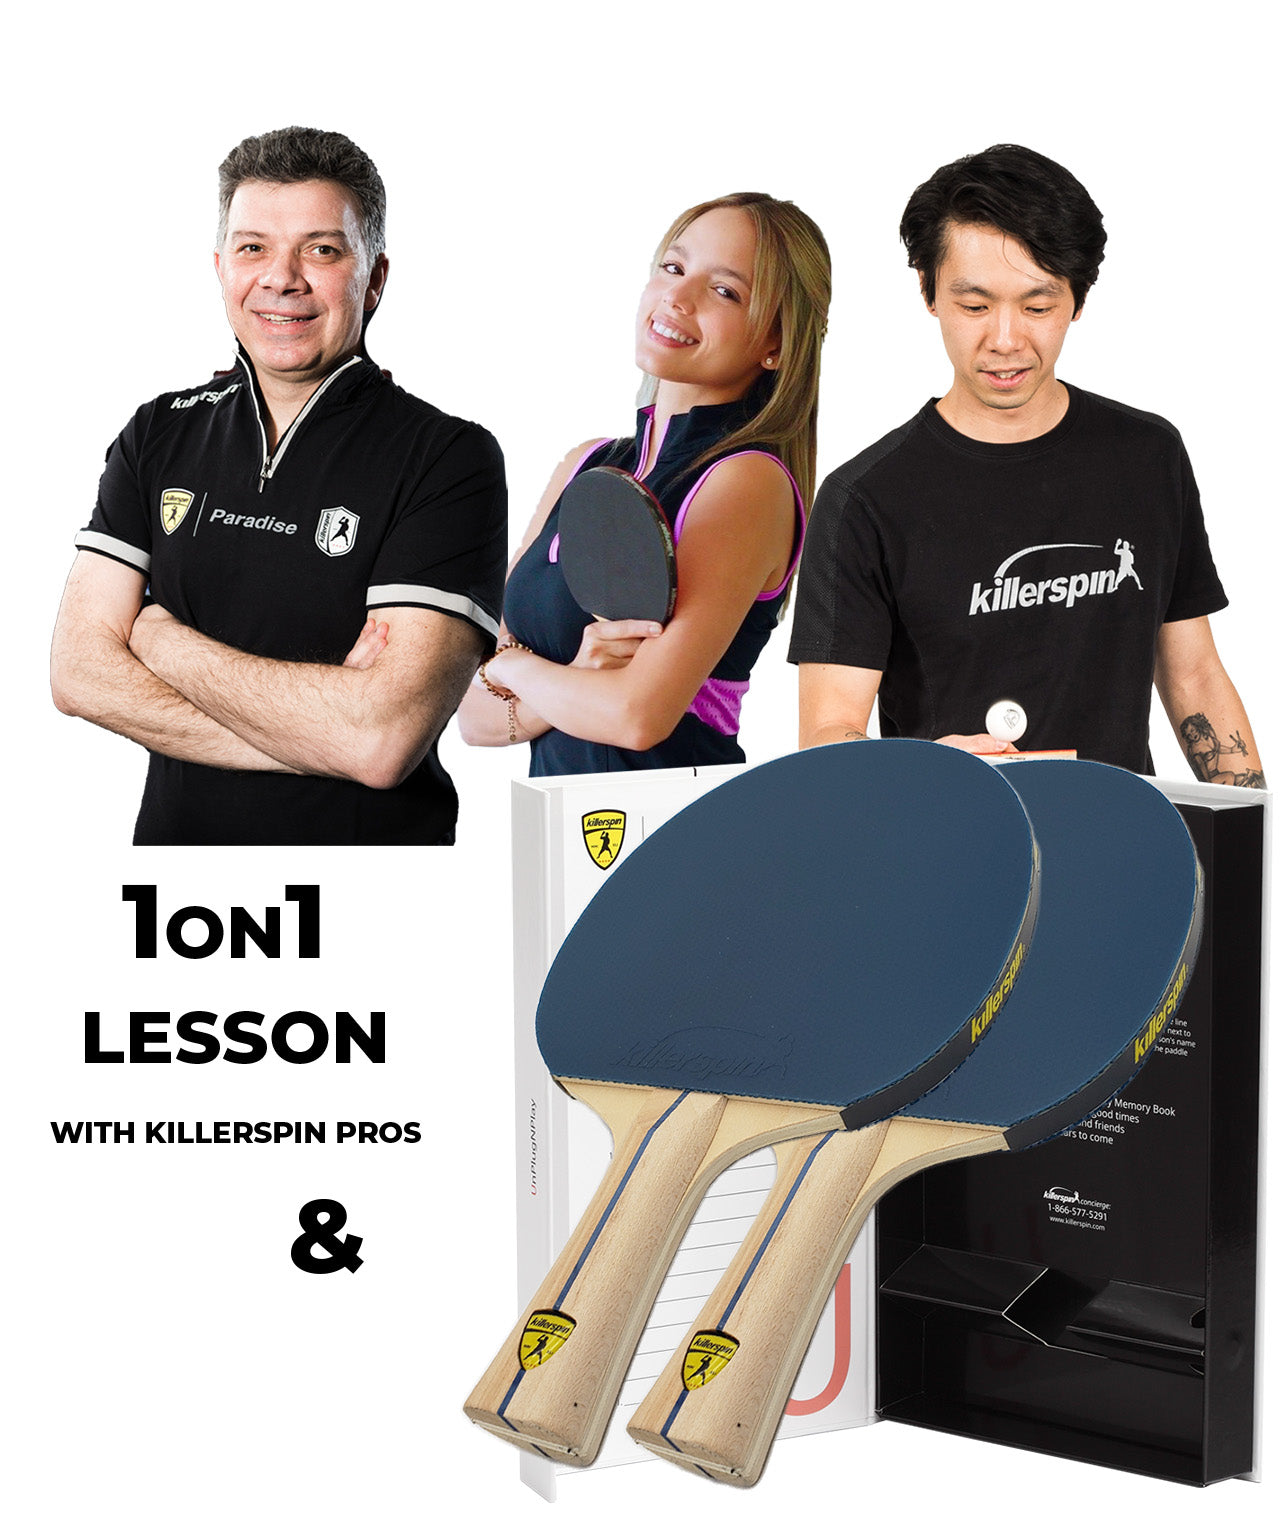 killerspin-table-tenis-table-free-gift-1on1-lesson-ks-pros-clasic-blue-paddle